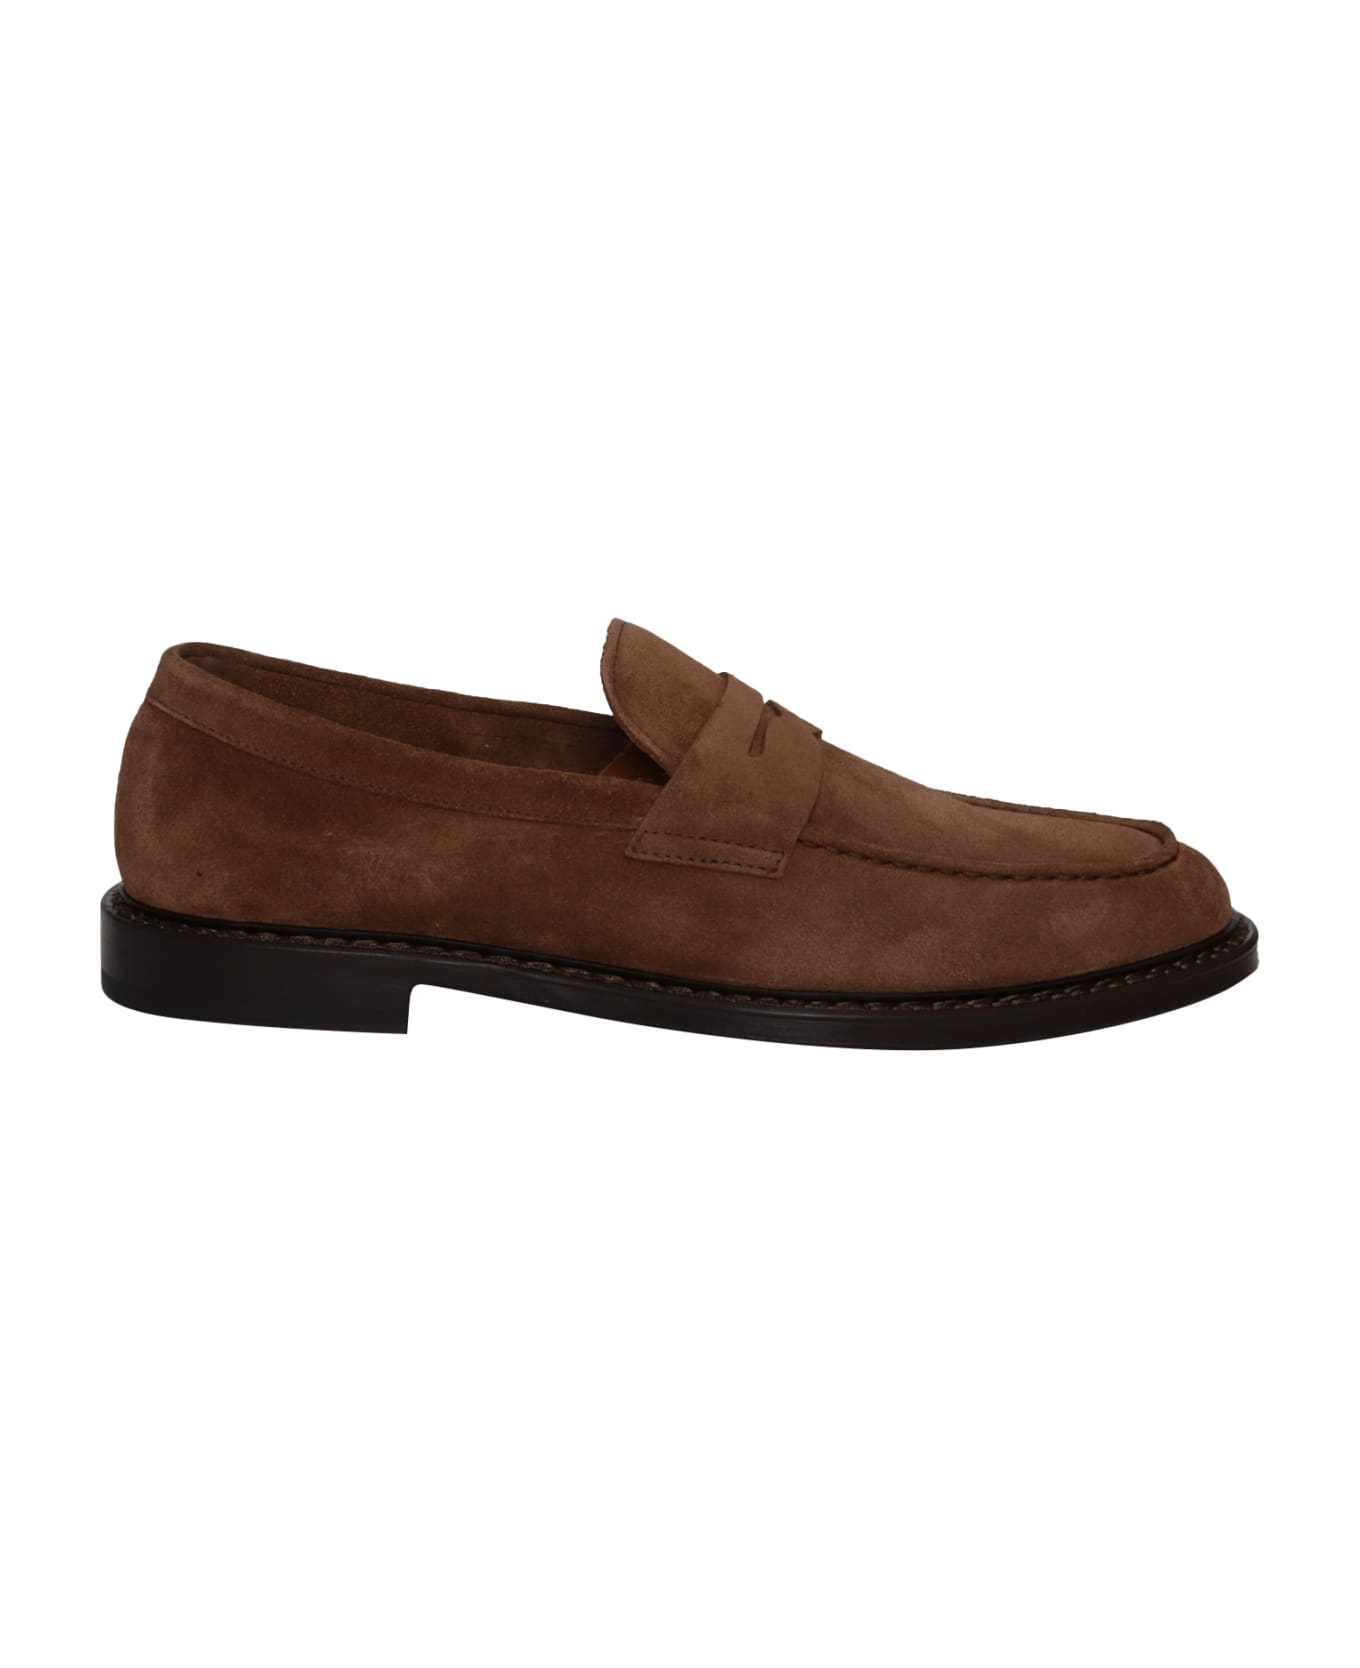 Doucal's Brown Loafers - BROWN